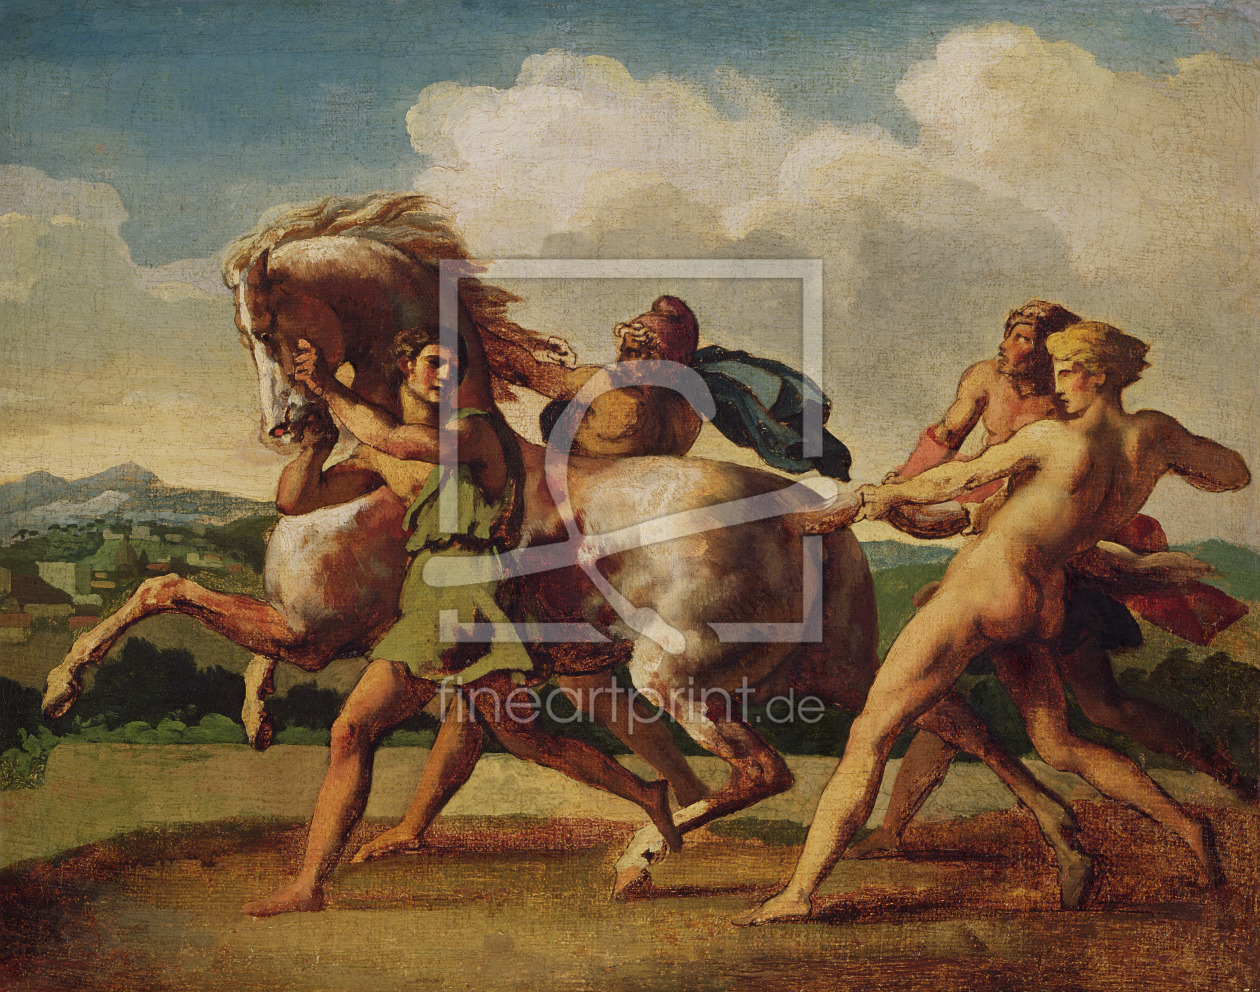 Bild-Nr.: 31000504 Slaves stopping a horse, study for 'The Race of the Barbarian Horses', 1817 erstellt von Géricault, Théodore